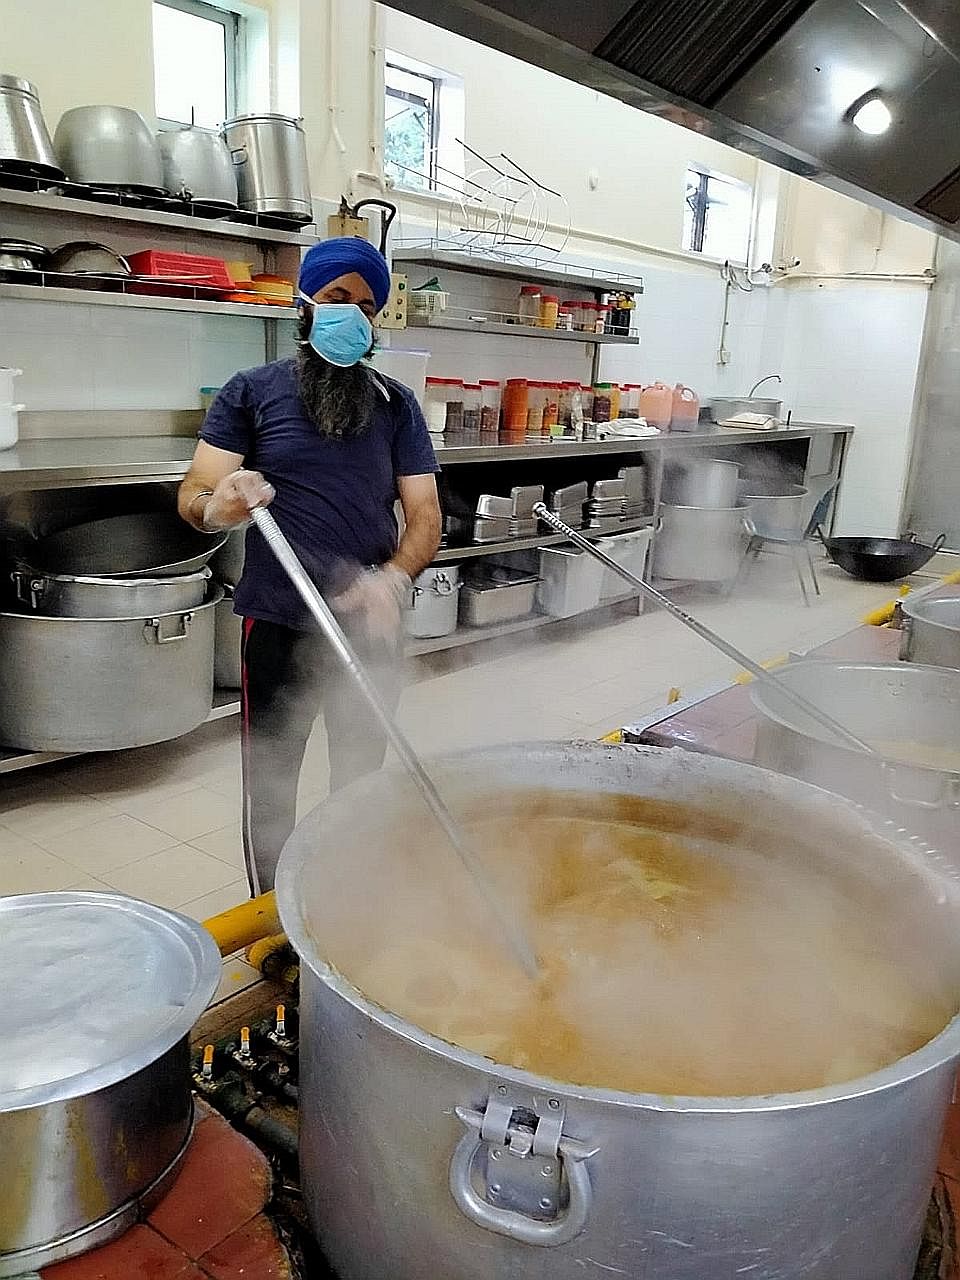 A volunteer preparing a meal under the Sikh community's free kitchen programme.